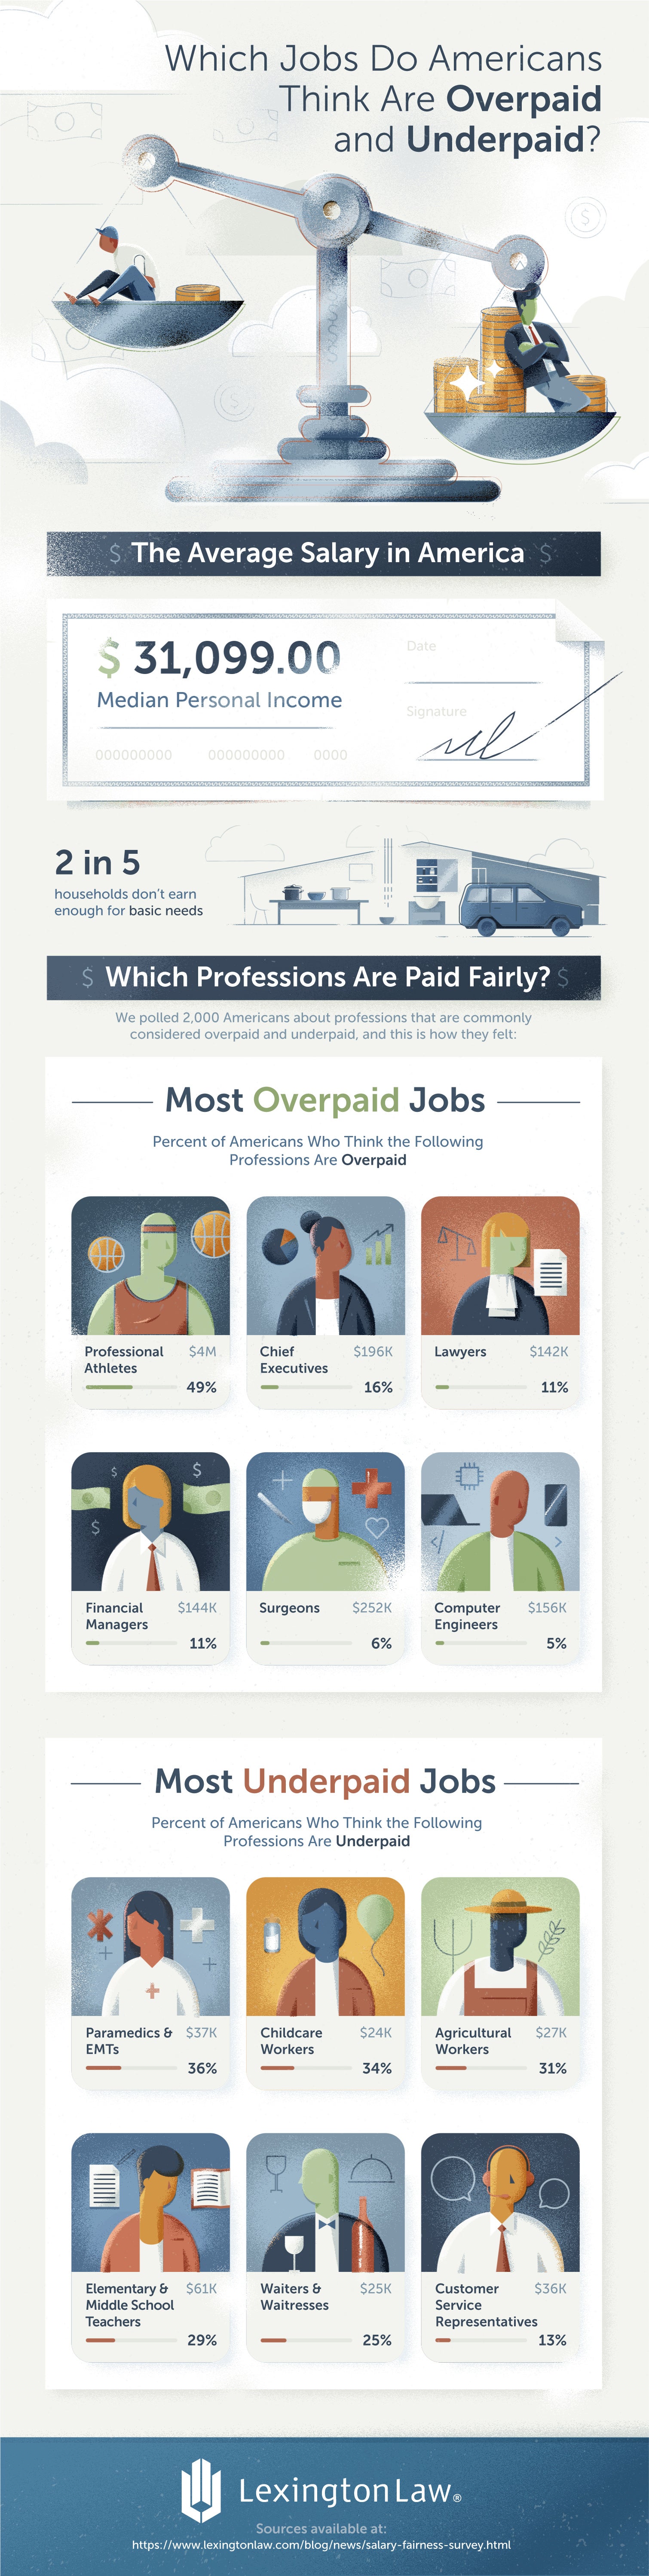 Which Jobs Do Americans Think Are Overpaid and Underpaid?